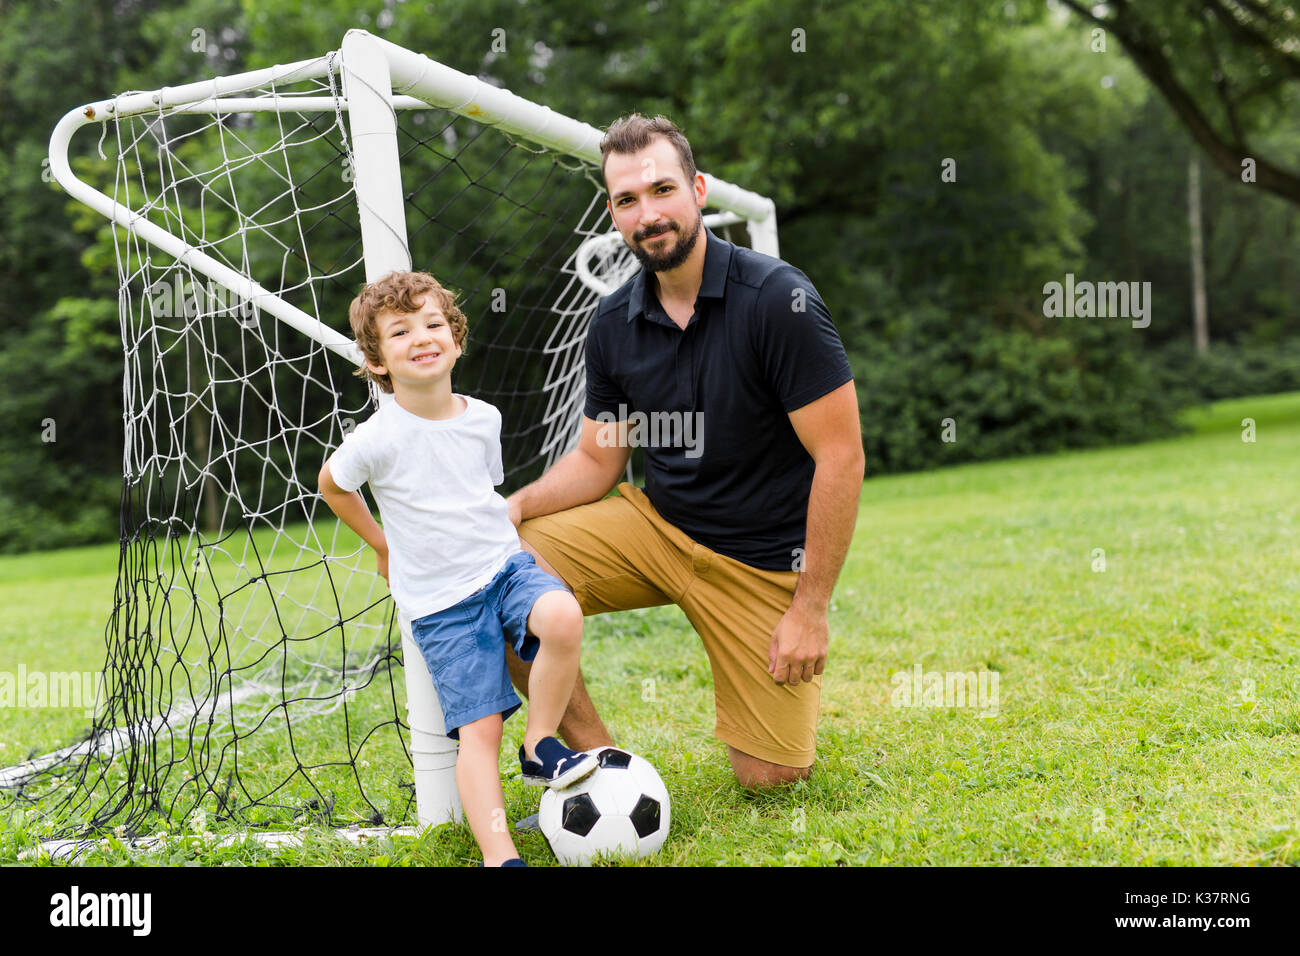 father with son playing football on football pitch Stock Photo